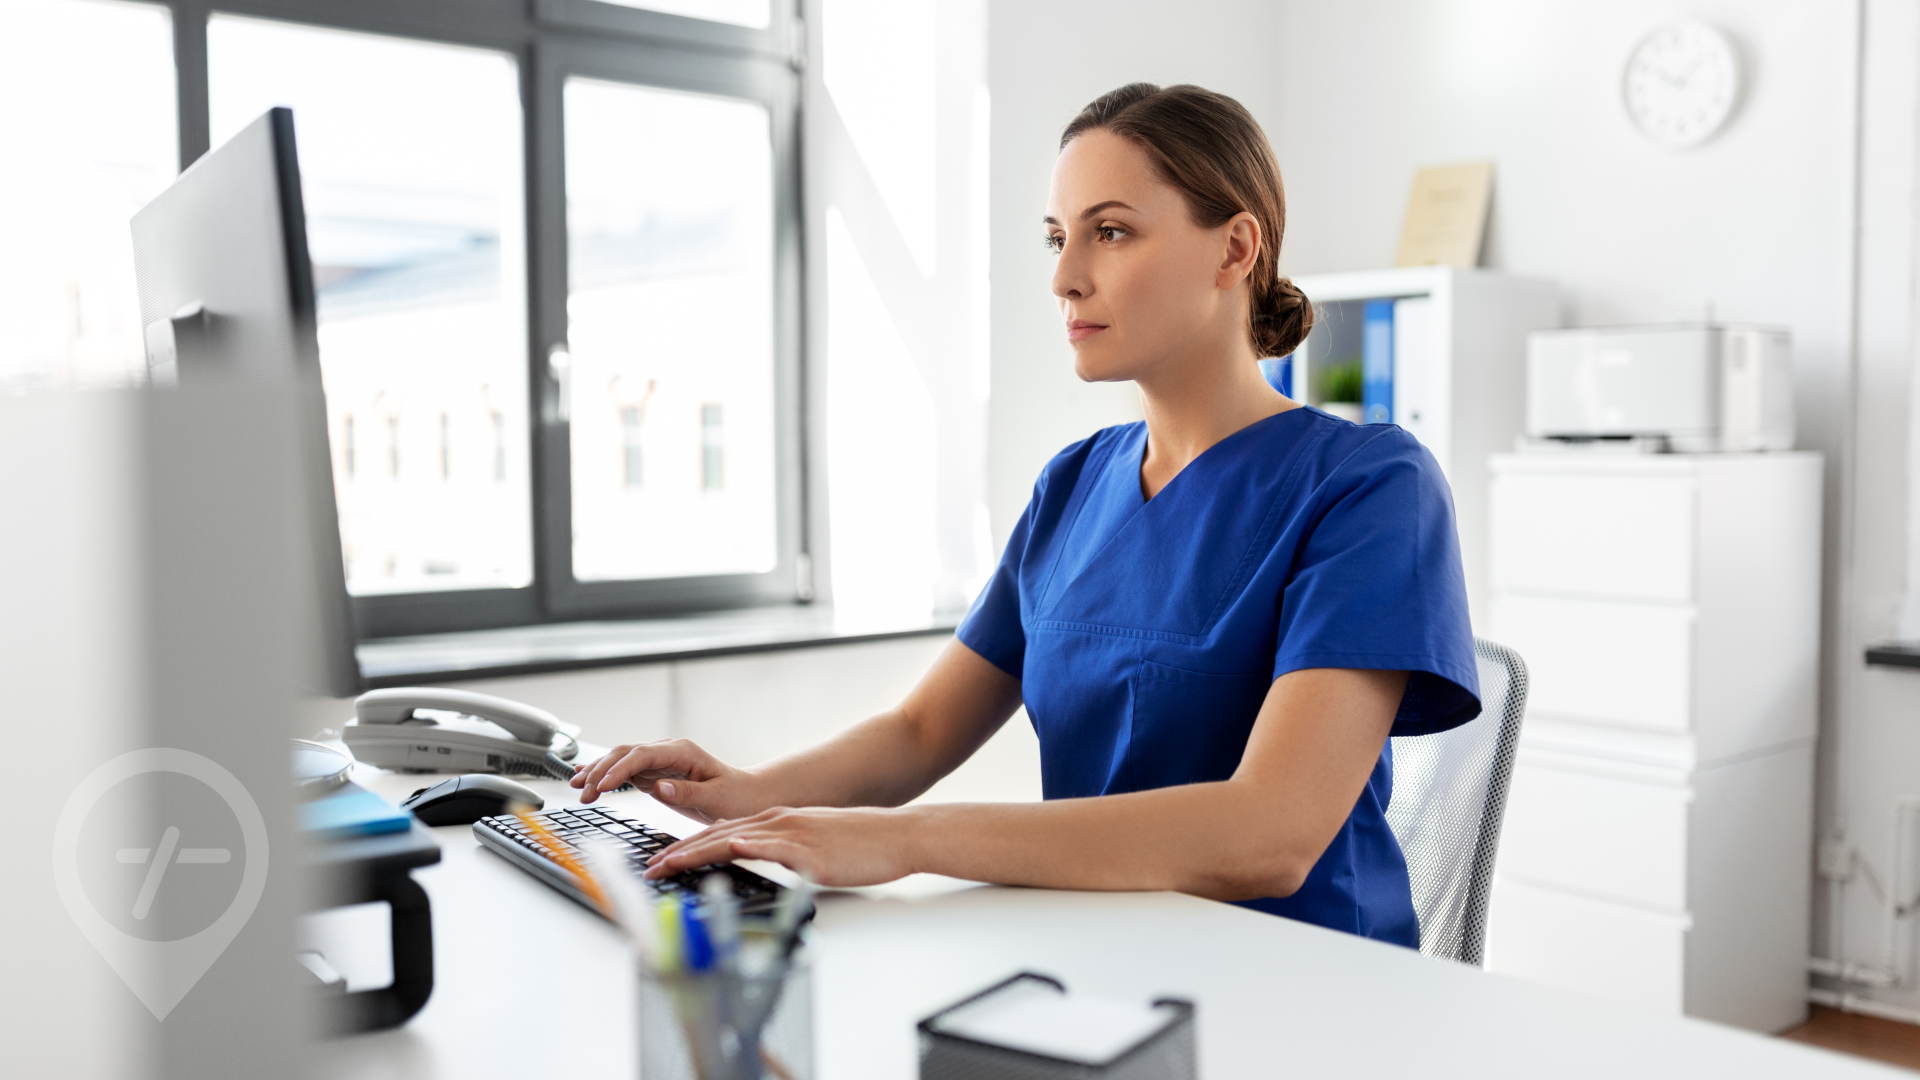 Together, ShiftMed and UKG can help your healthcare organization navigate the complexities of nurse staffing in a complex industry. All it takes is a simple API integration to get these two leading technology platforms working together to establish a sustainable healthcare workforce management strategy.